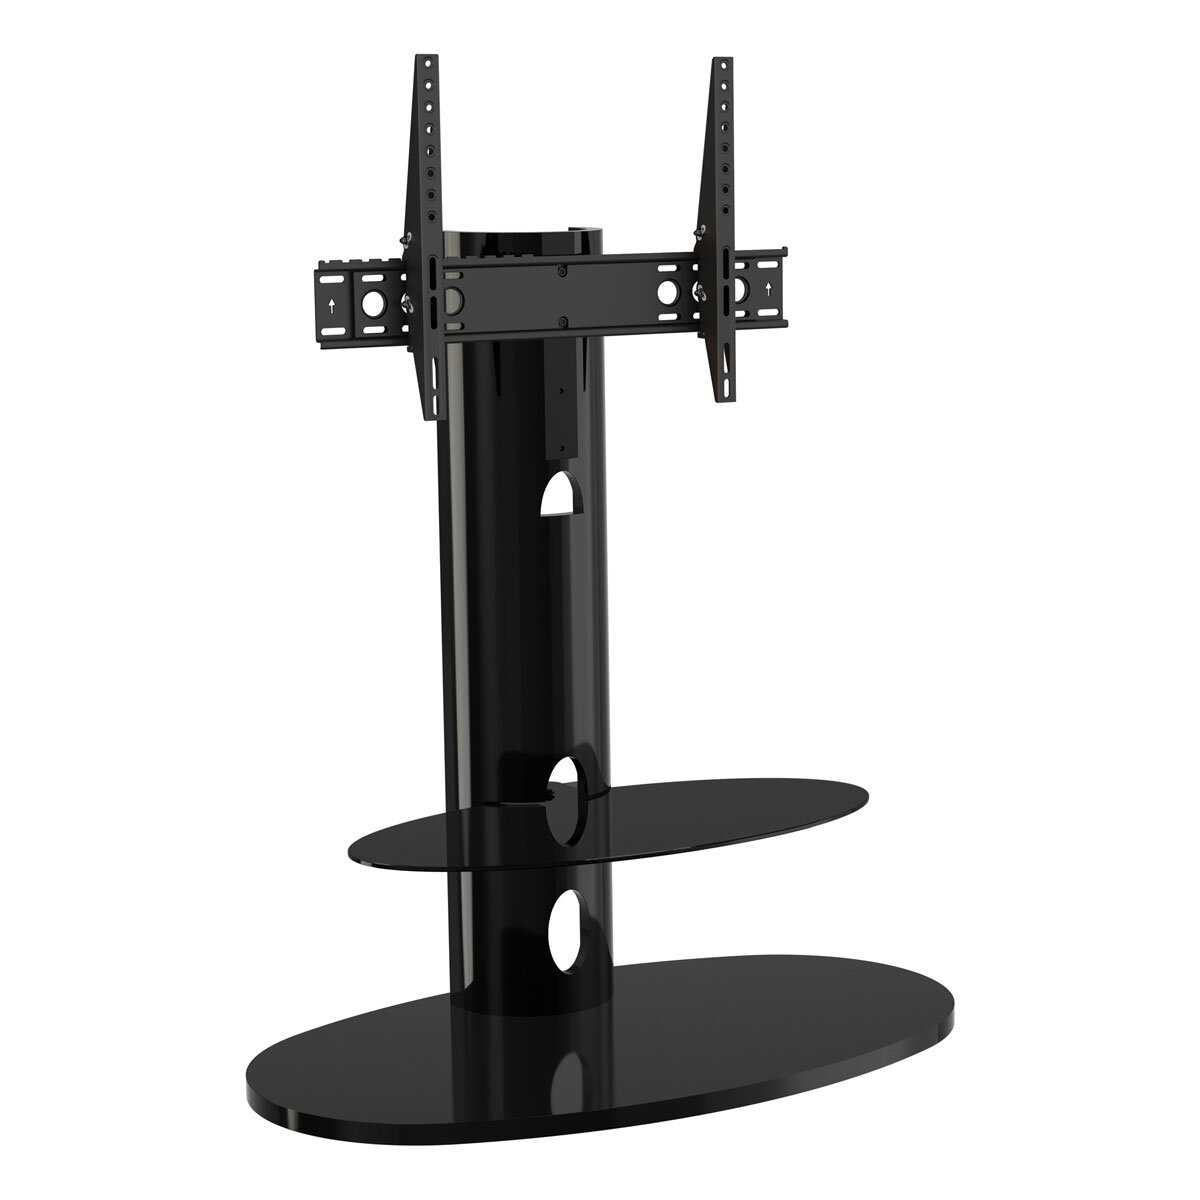 AVF Chepstow 930 TV Stand for TVs up to 65", Gloss Black